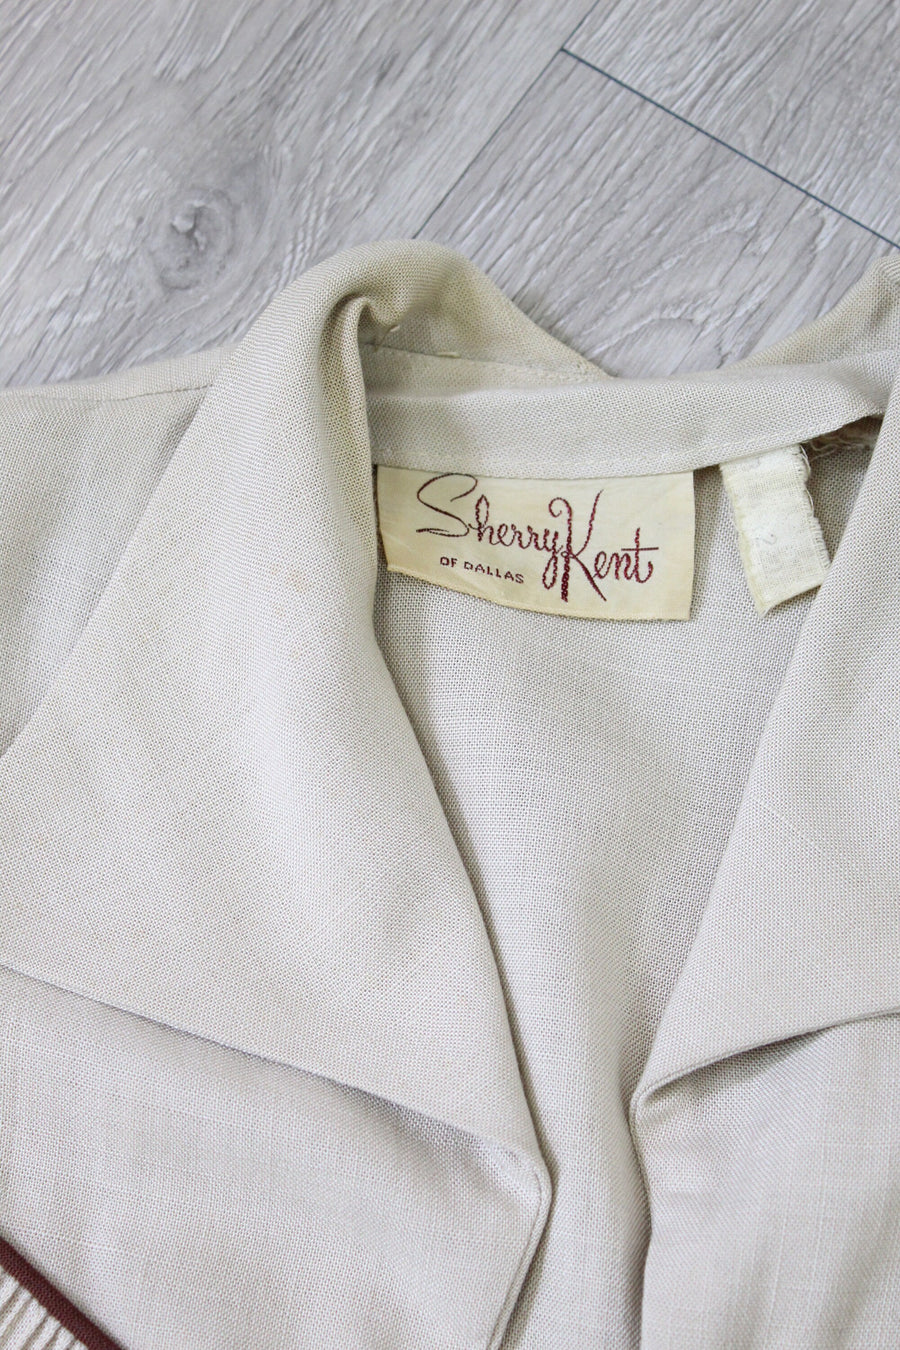 1940s SUMMER SUIT jacket and skirt small | new spring